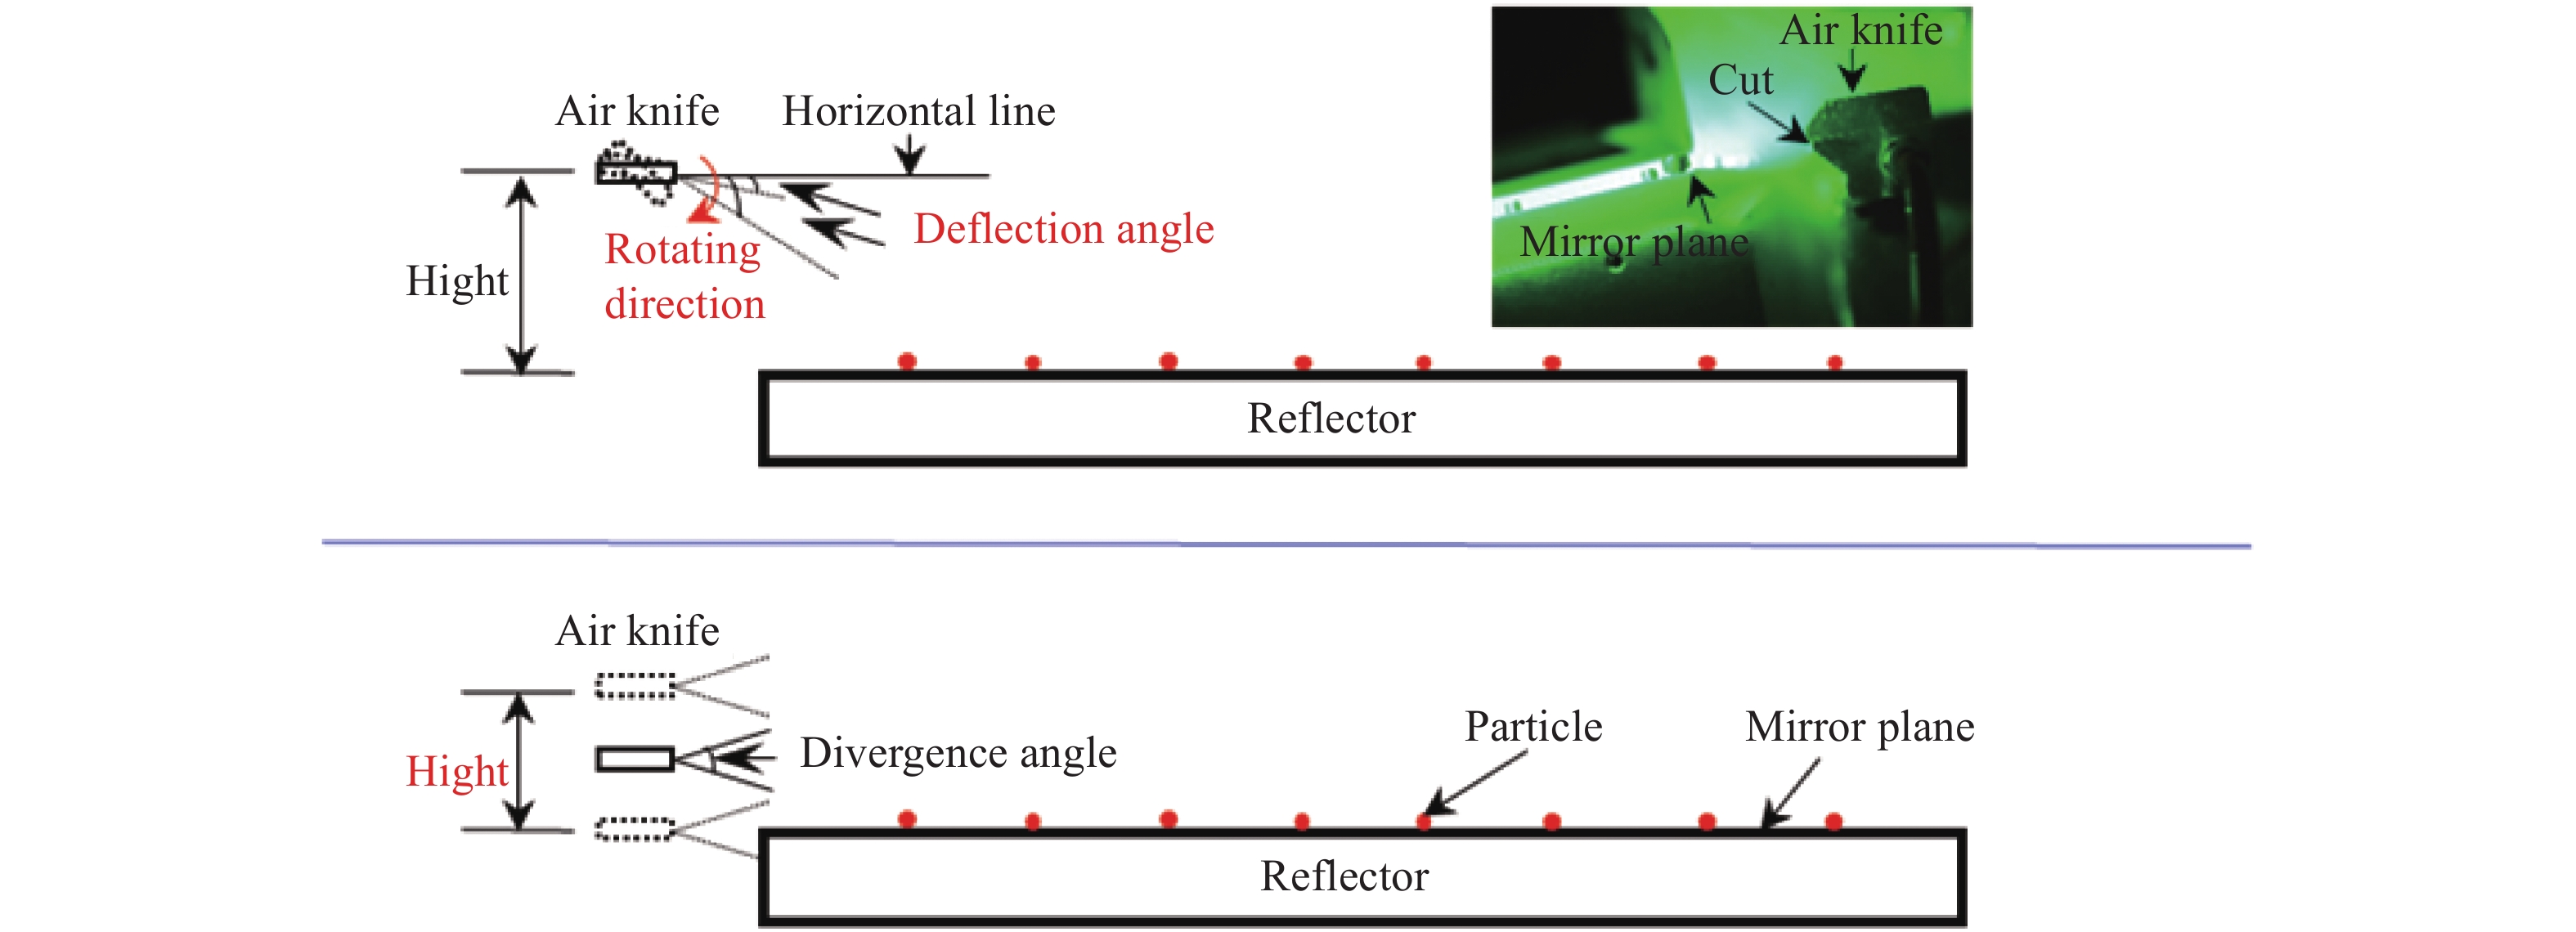 Boundary model of surface contamination of reflector removal by air knife sweeping